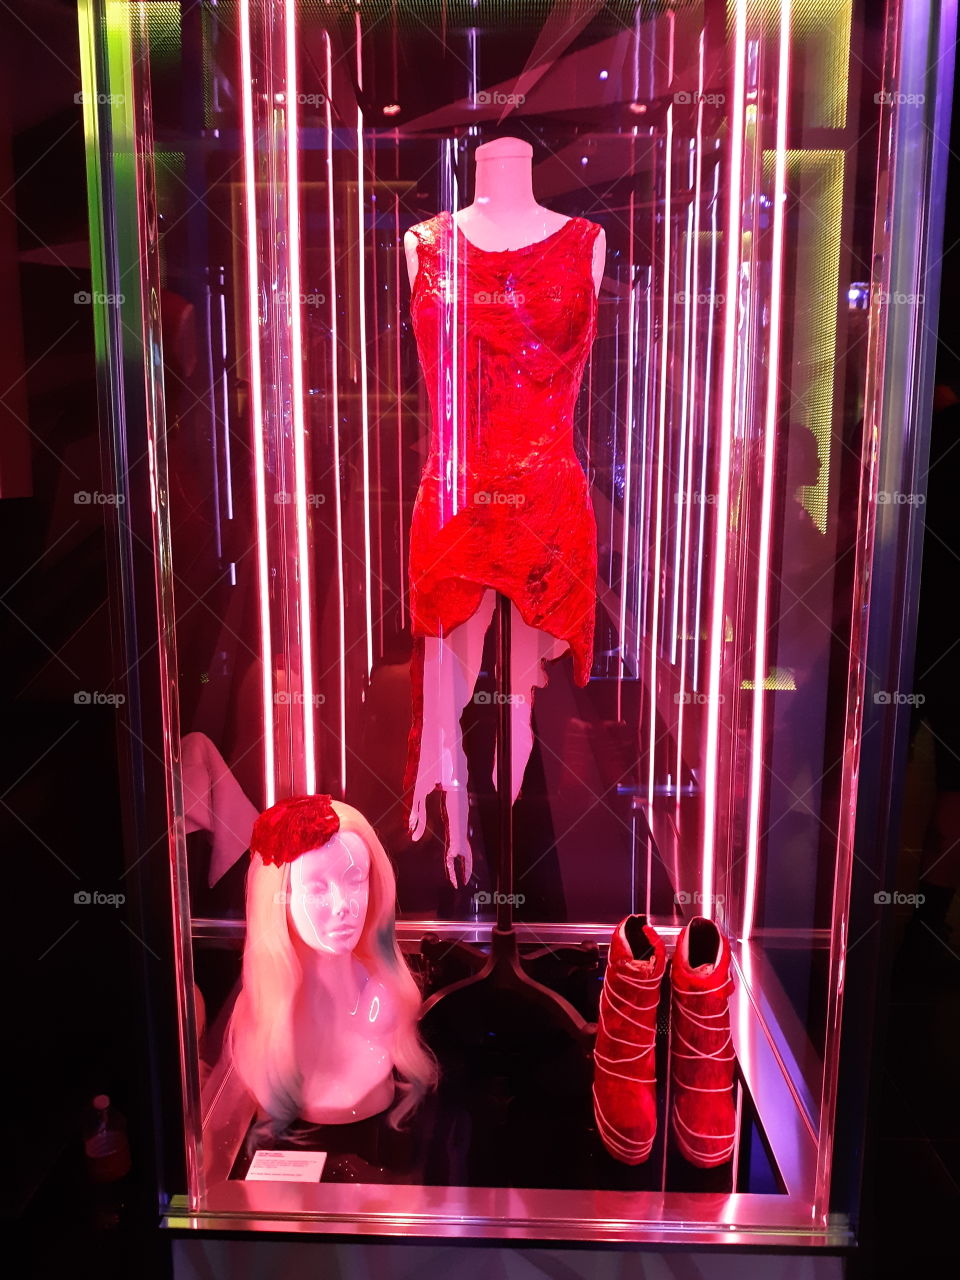 Lady Gaga's beautiful red dress with matching boots and headpiece.